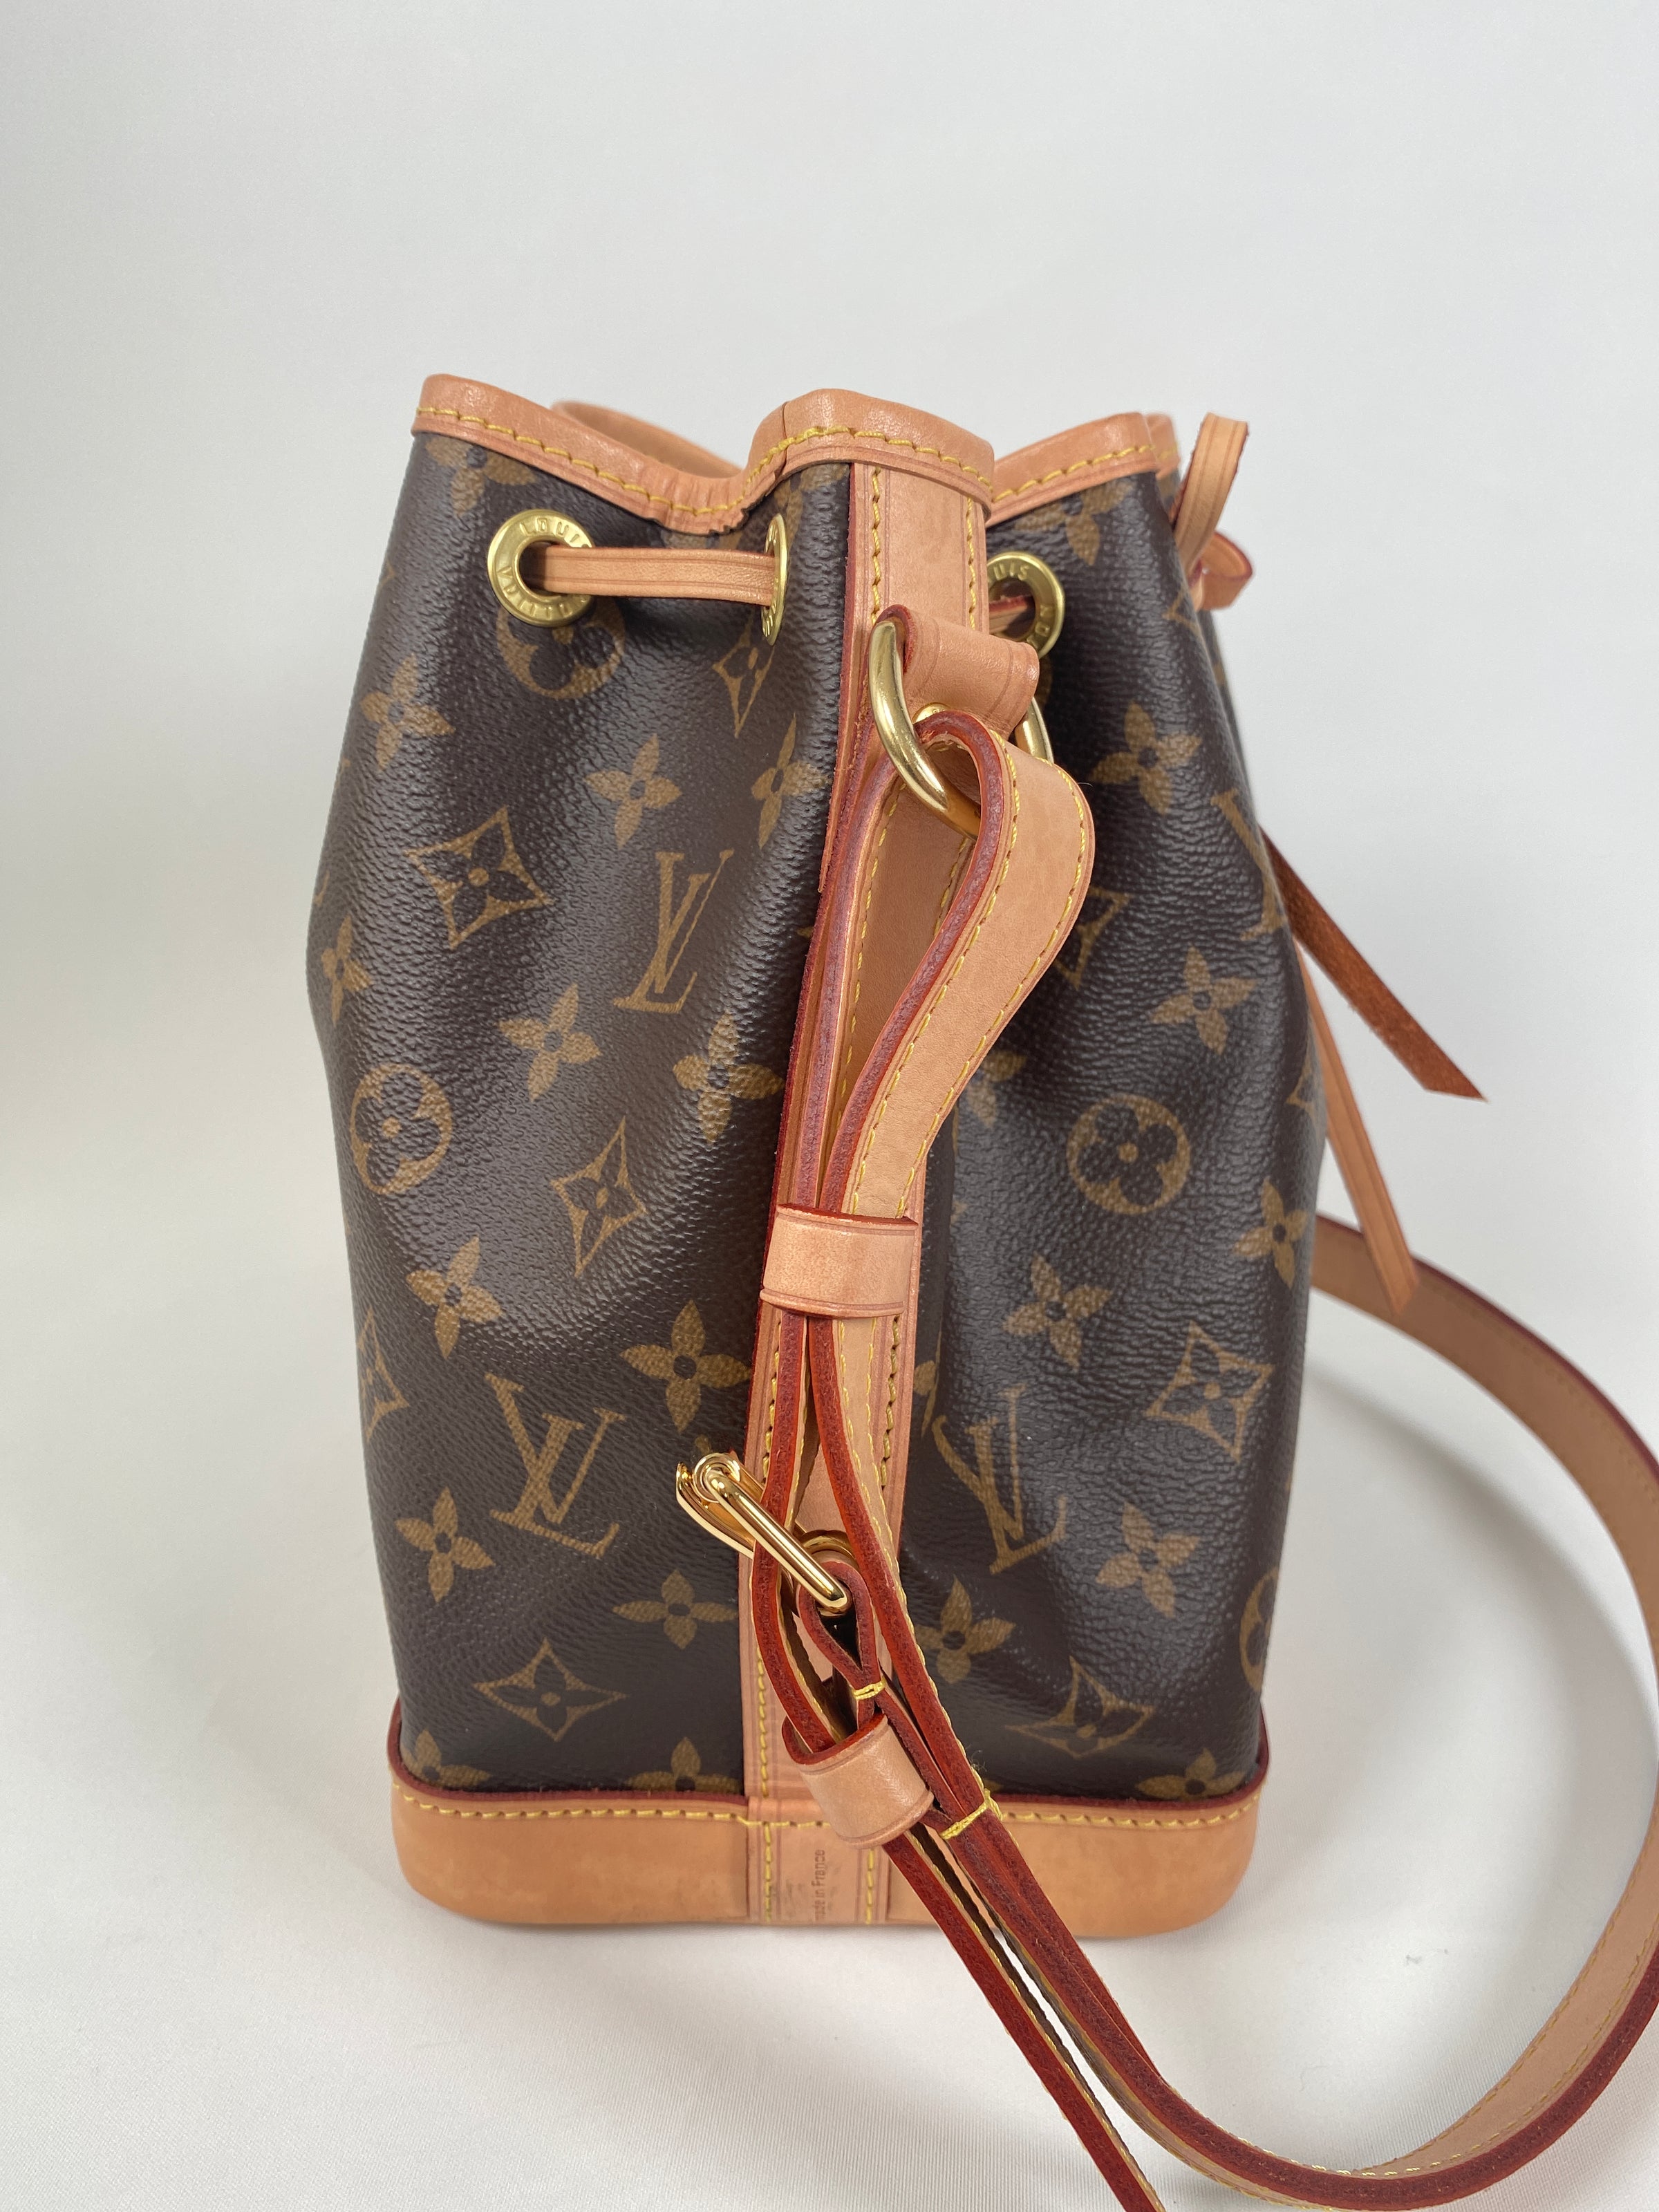 LOUIS VUITTON Babylone Chain BB On sale Website search for XS1203 Free  shipping worldwide #sheerroom #louisvuitton #authentic